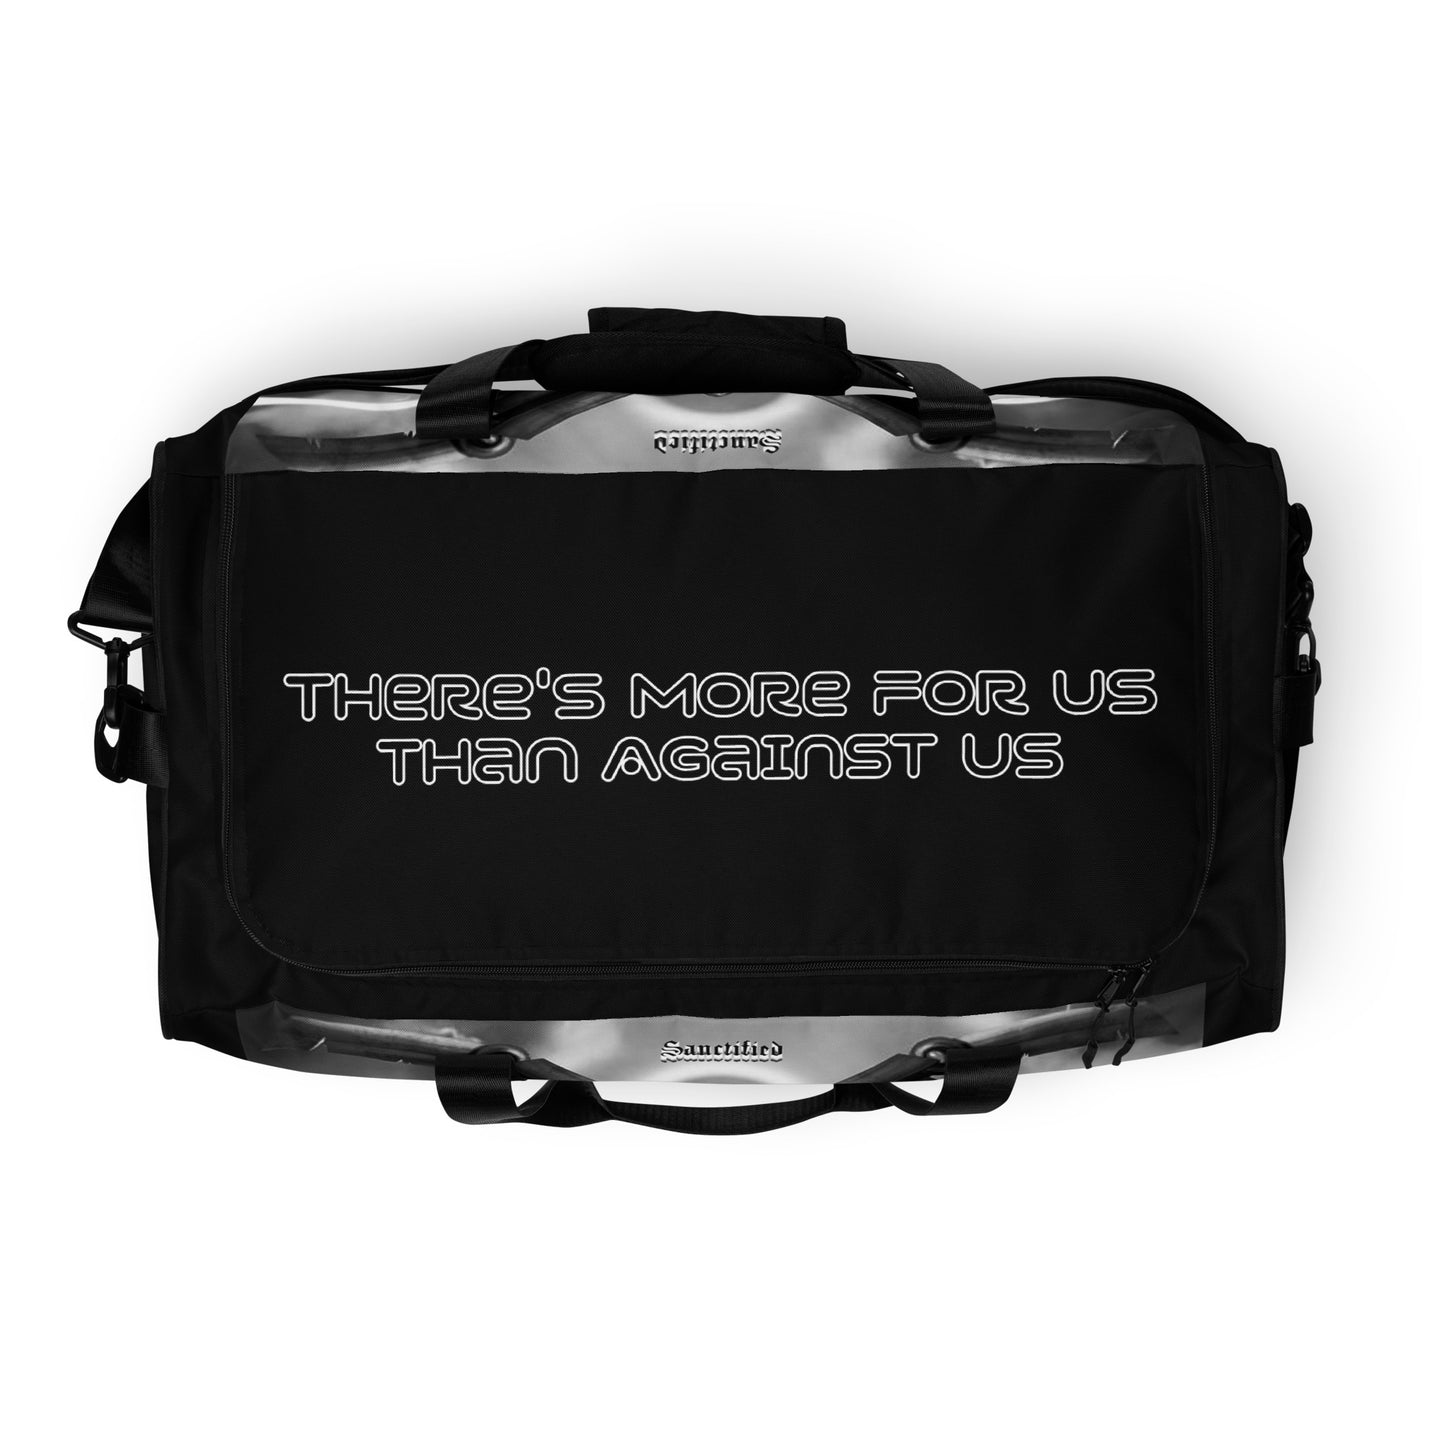 More For Us- Duffle bag